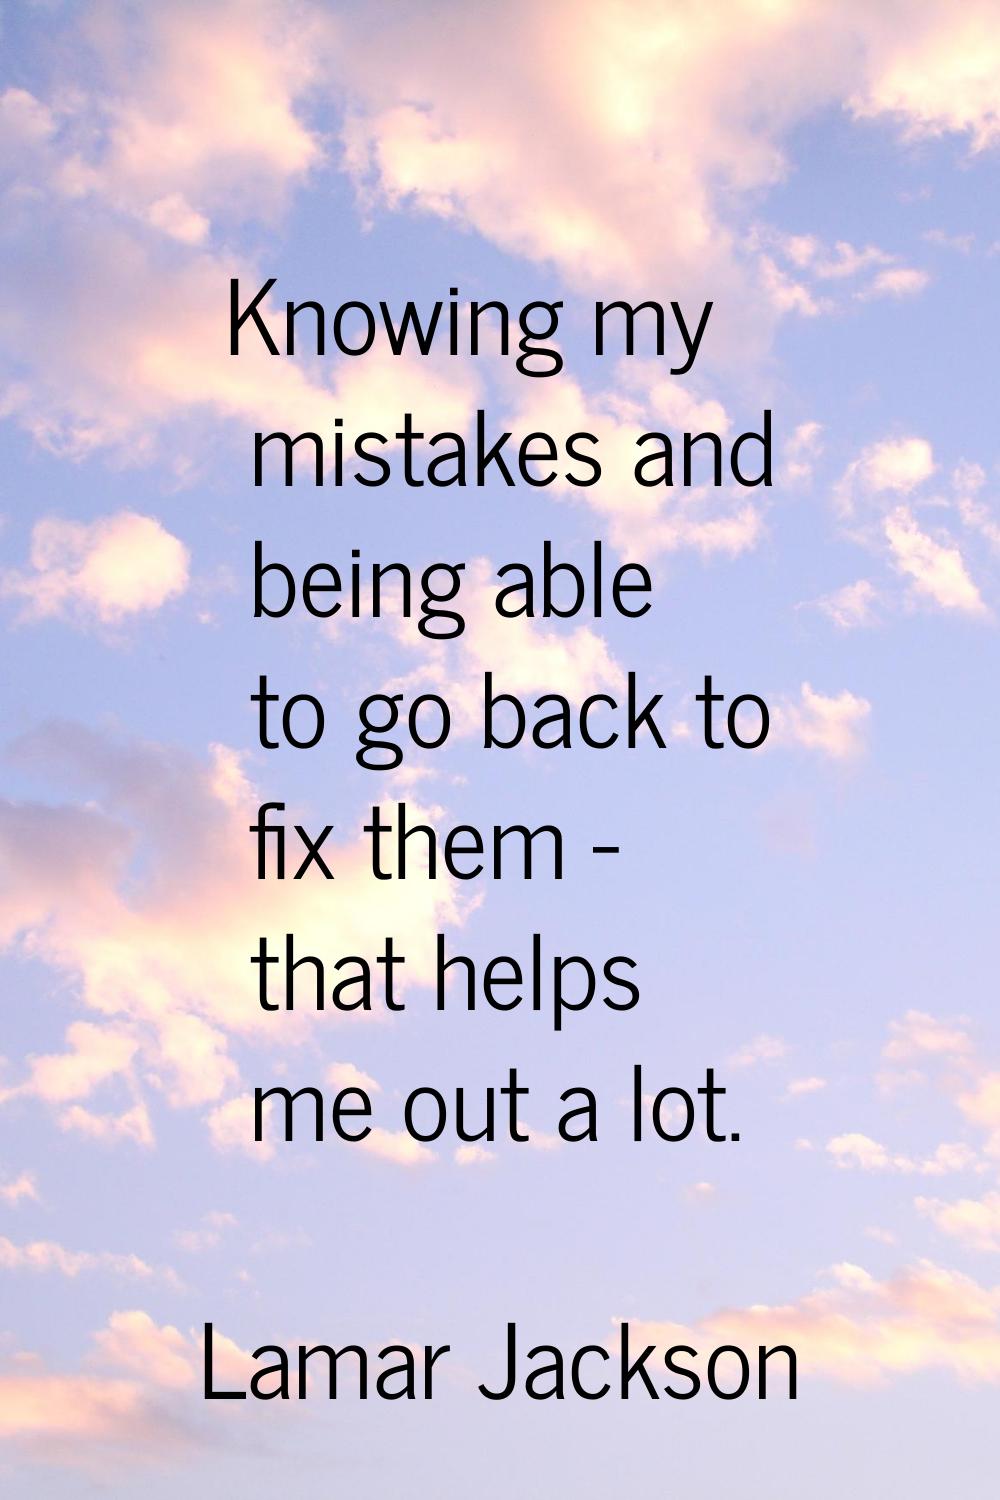 Knowing my mistakes and being able to go back to fix them - that helps me out a lot.